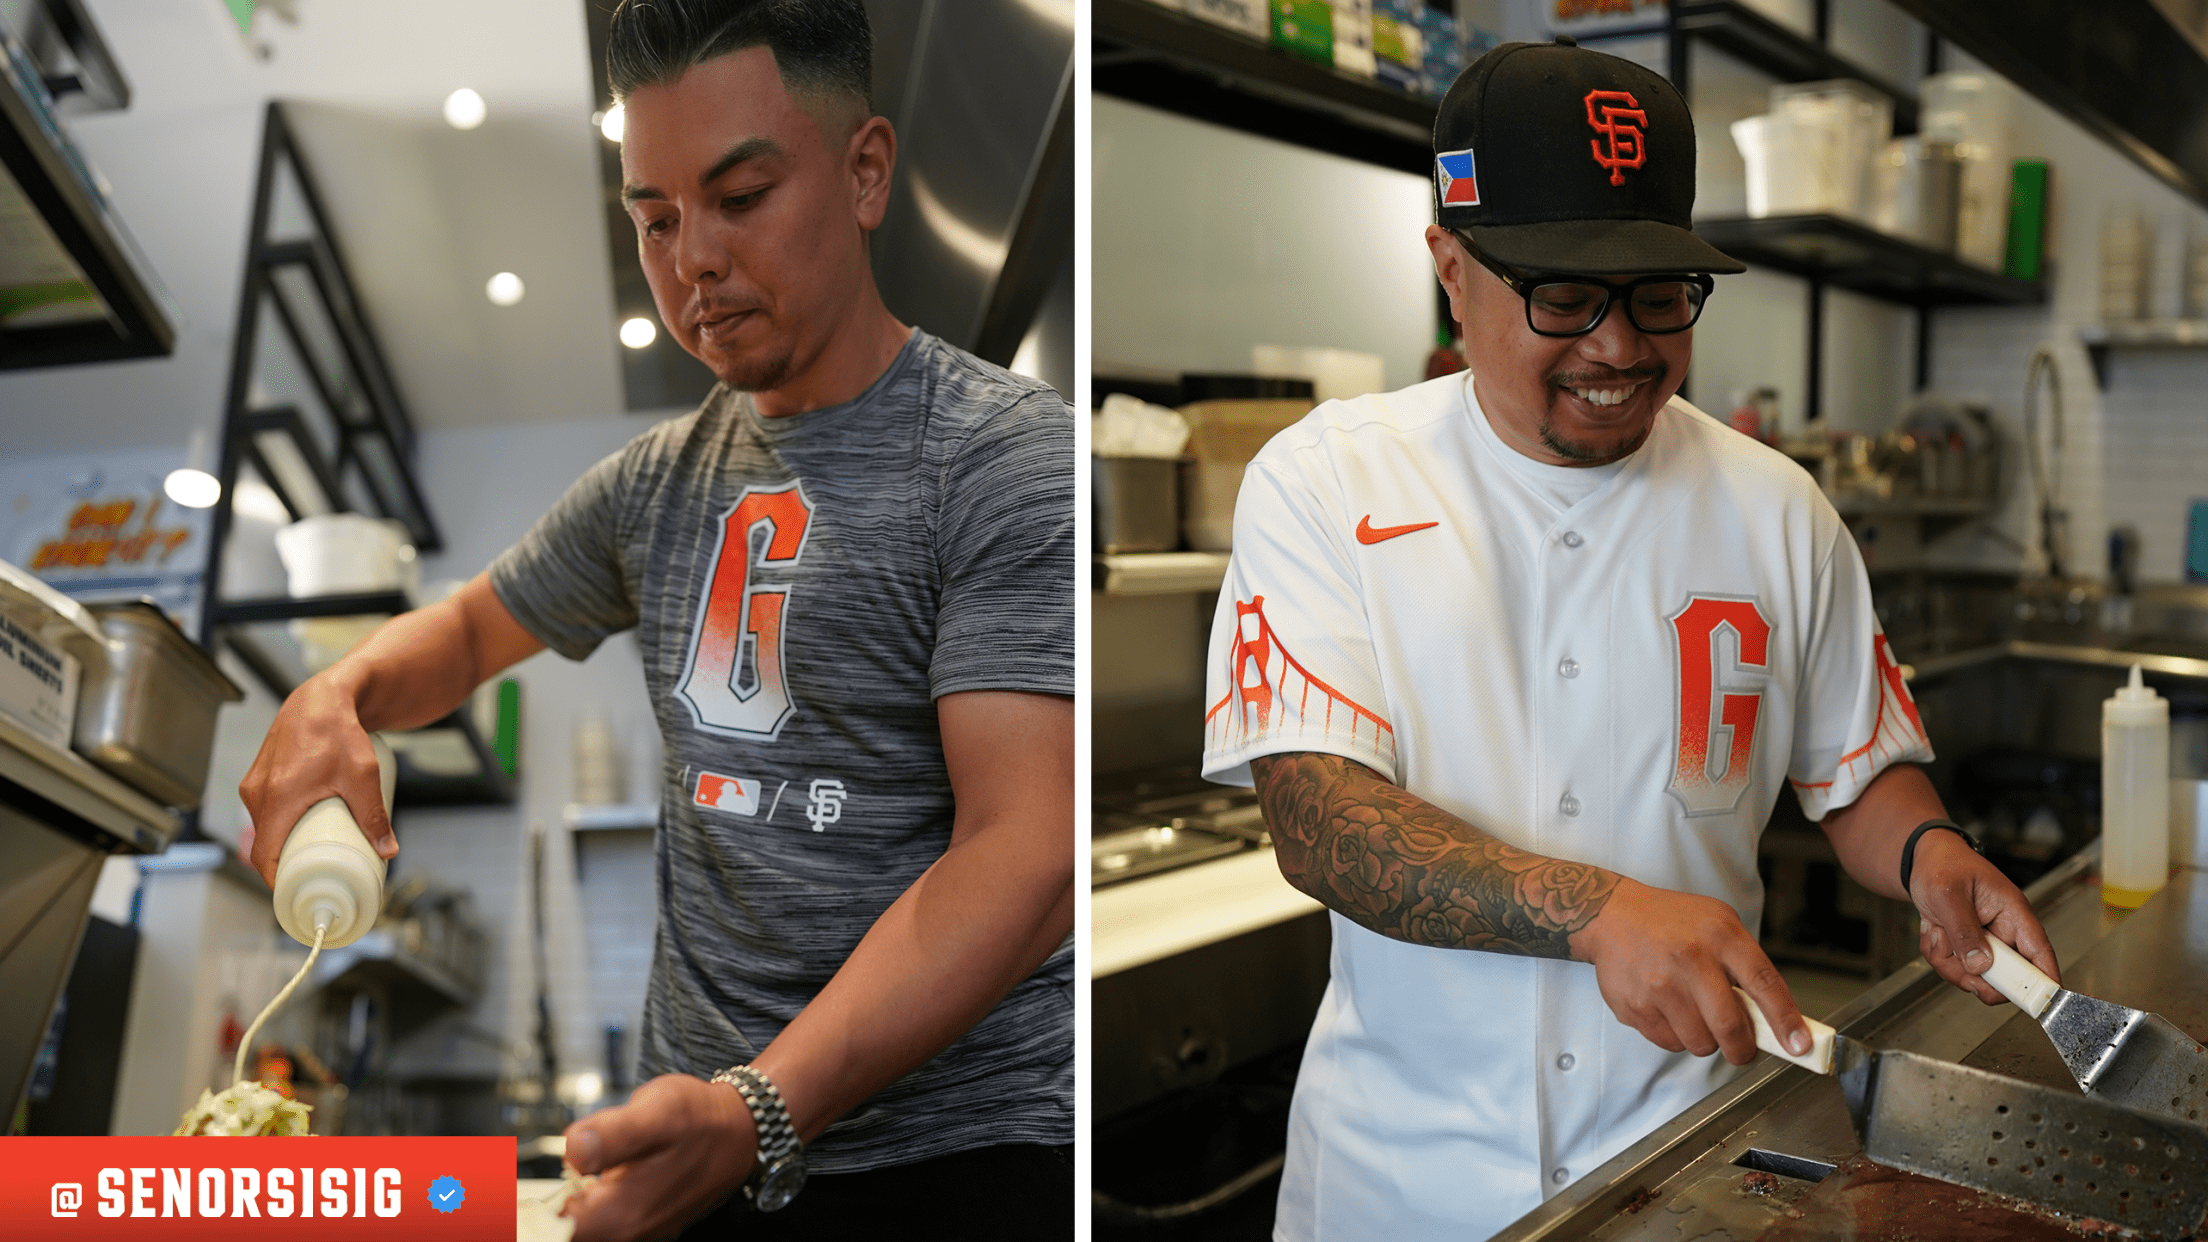 The S.F. Giants City Connect jerseys are bad. They are not the